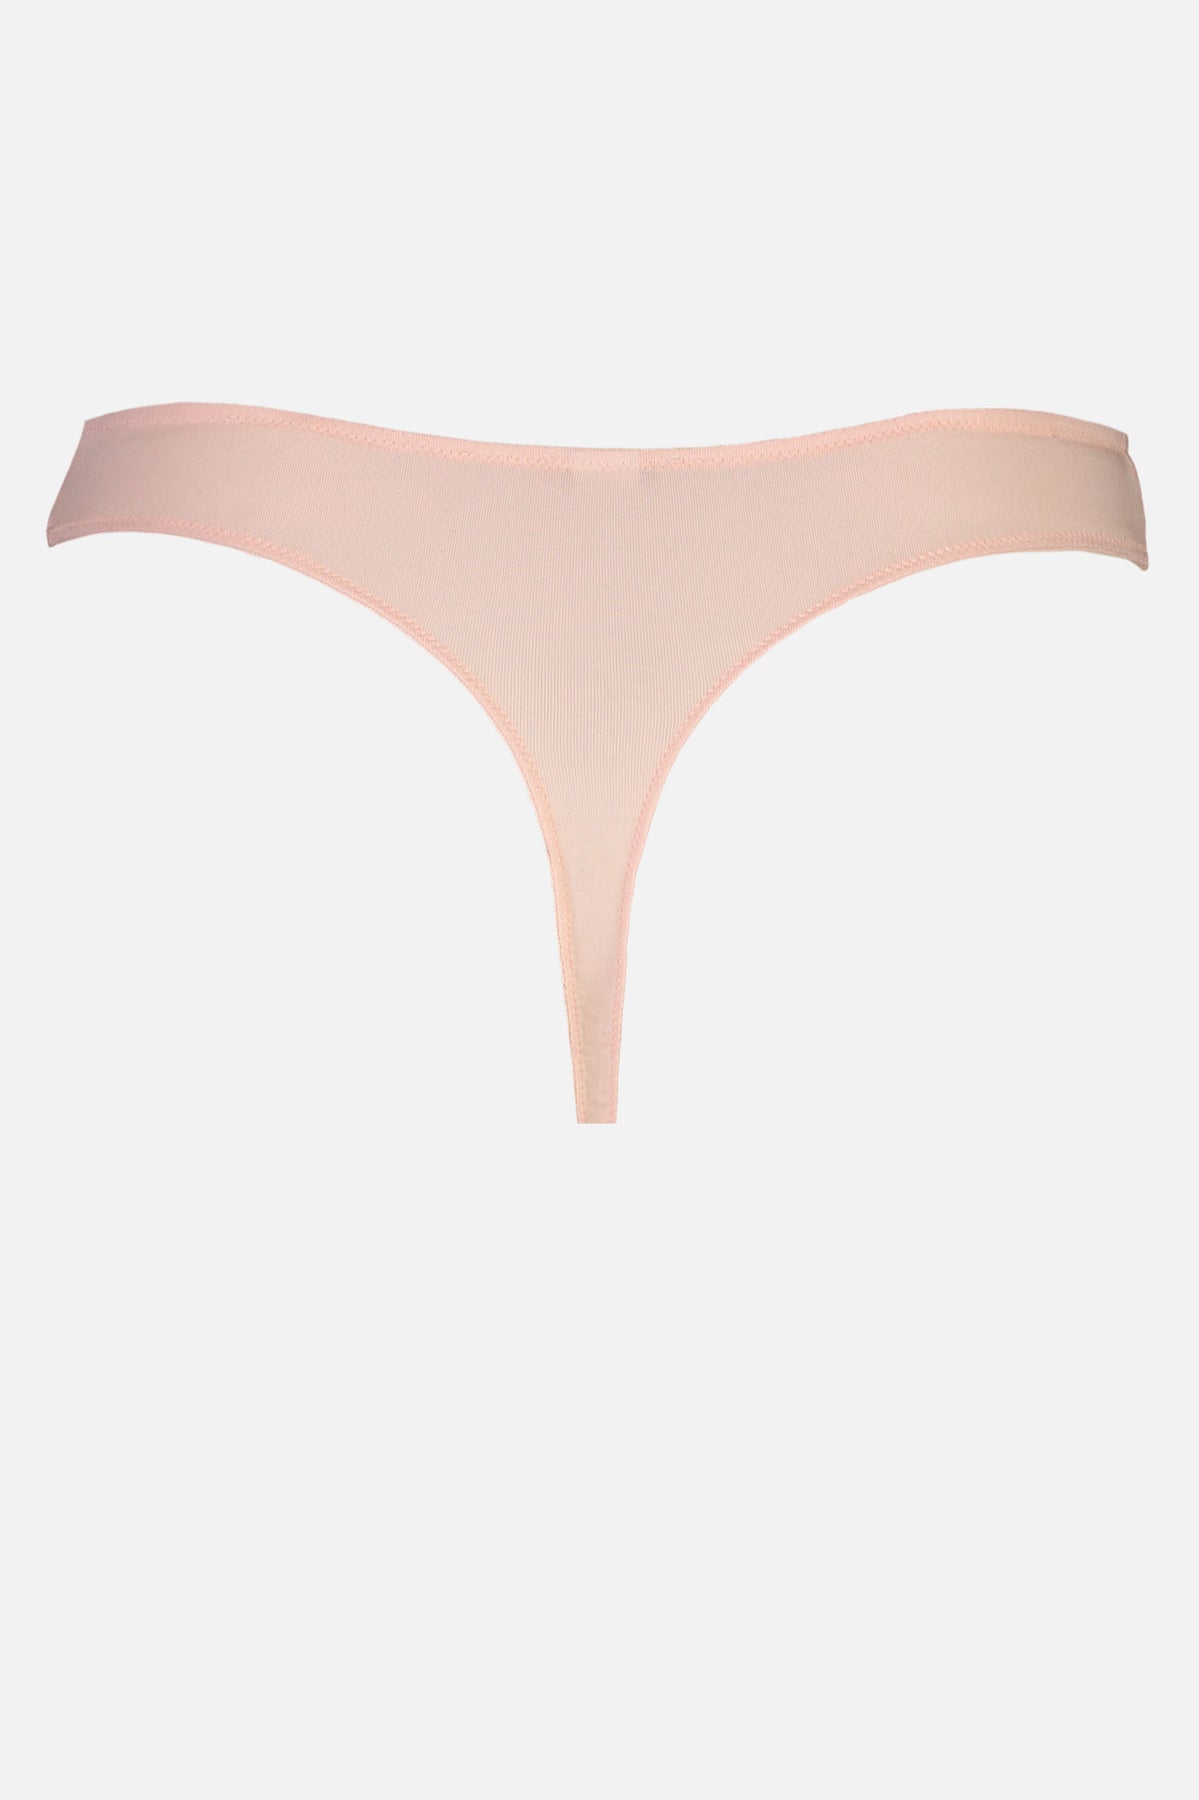 Whitney Thong in Rosy